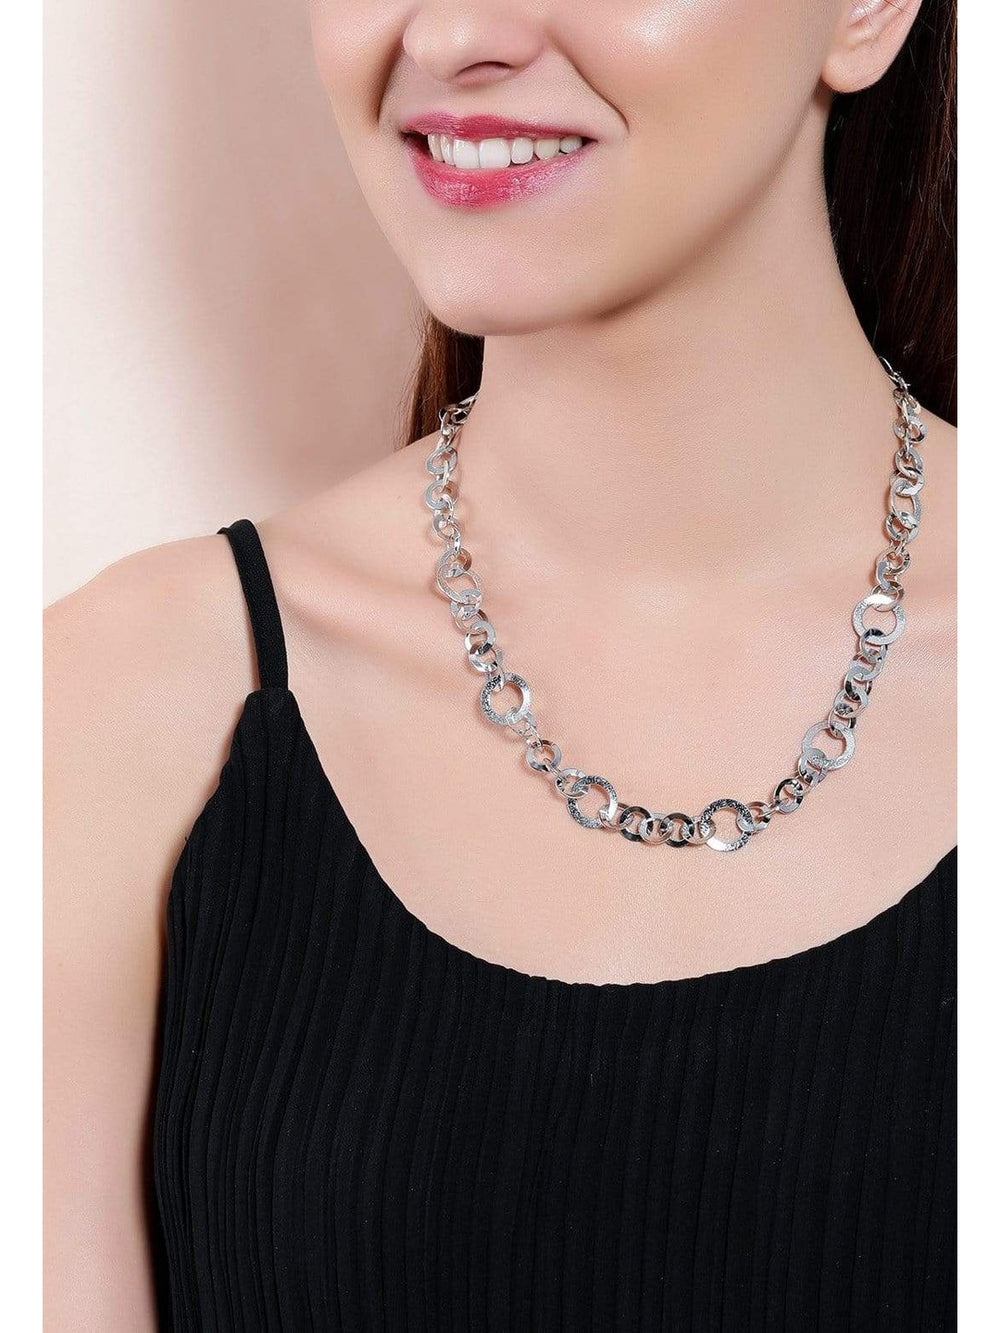 Rubans Silver Plated  Inter linked Necklace Necklace Set